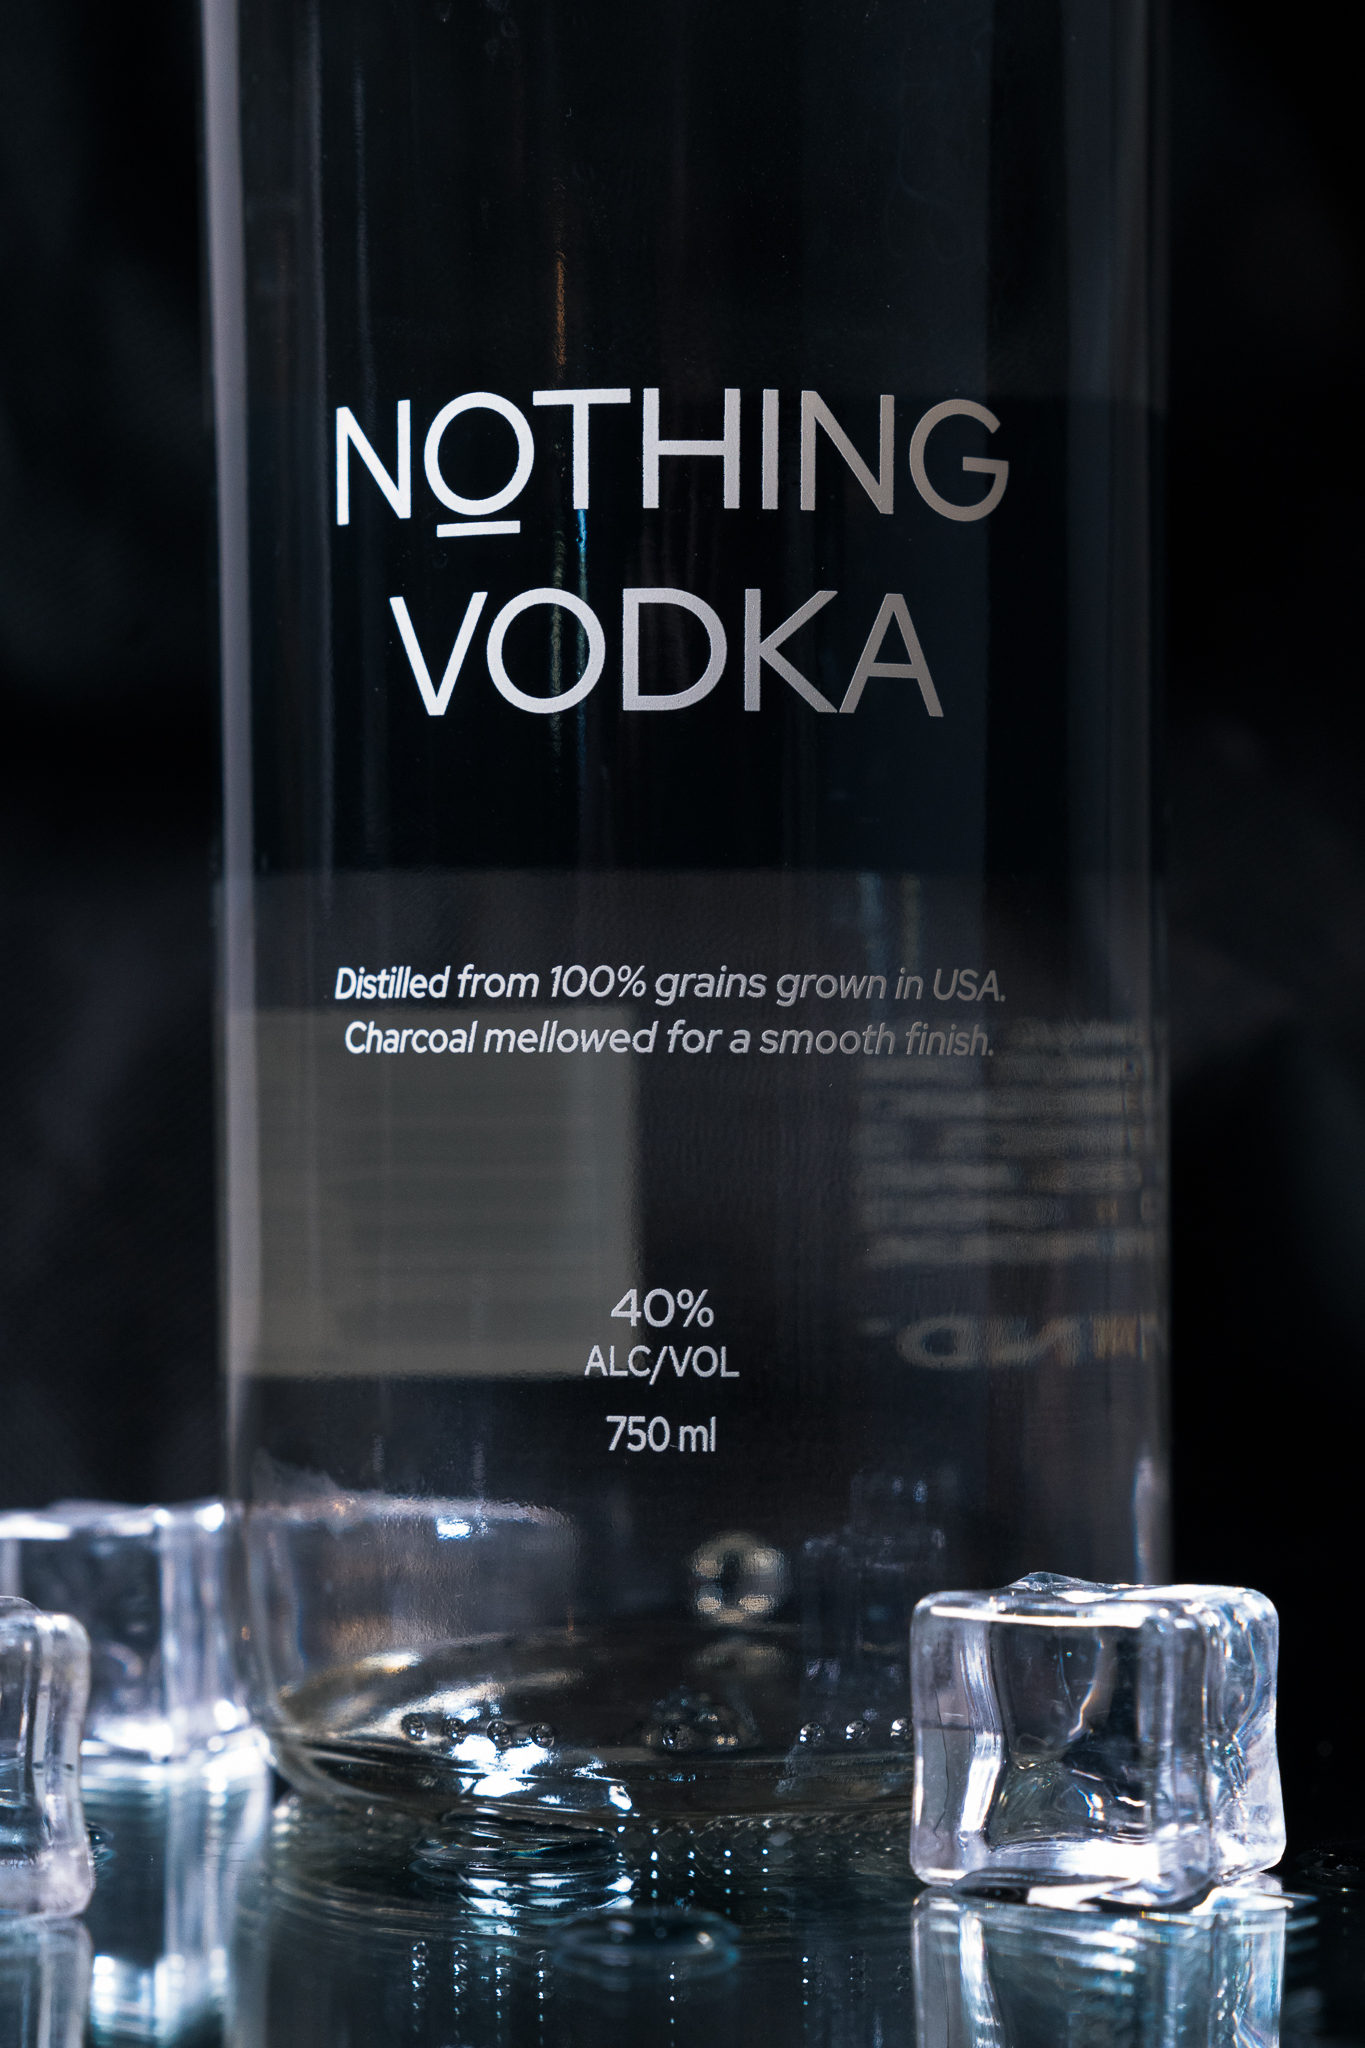 Award-Winning Distillery Launches Nothing